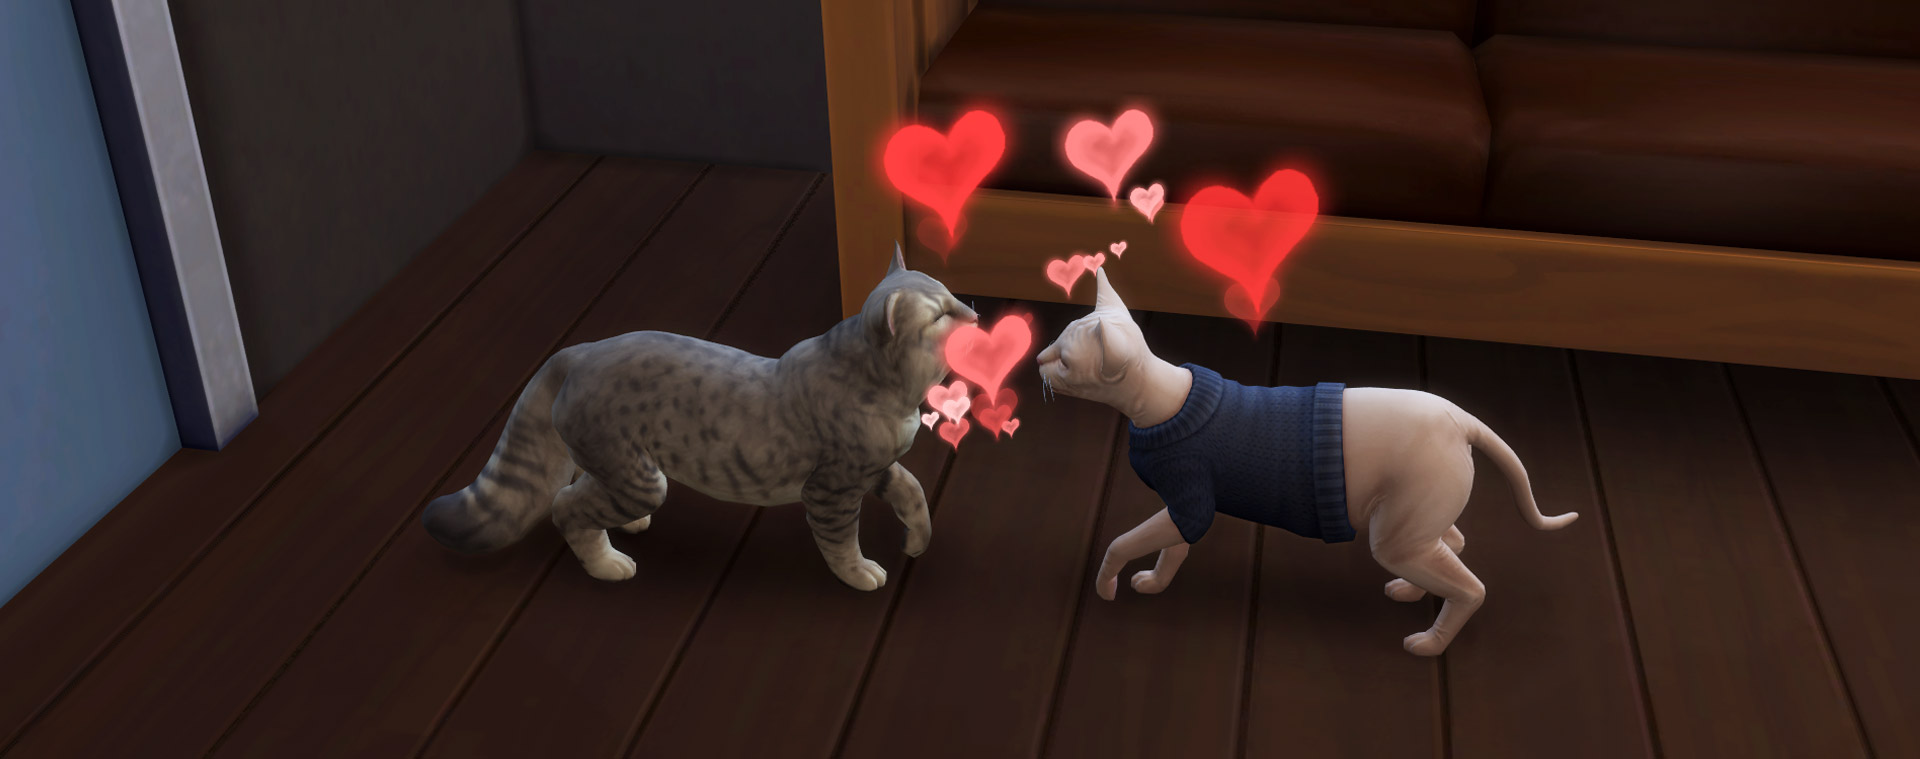 The sims 4 cats and dogs how long does it take for puppies to age up ...